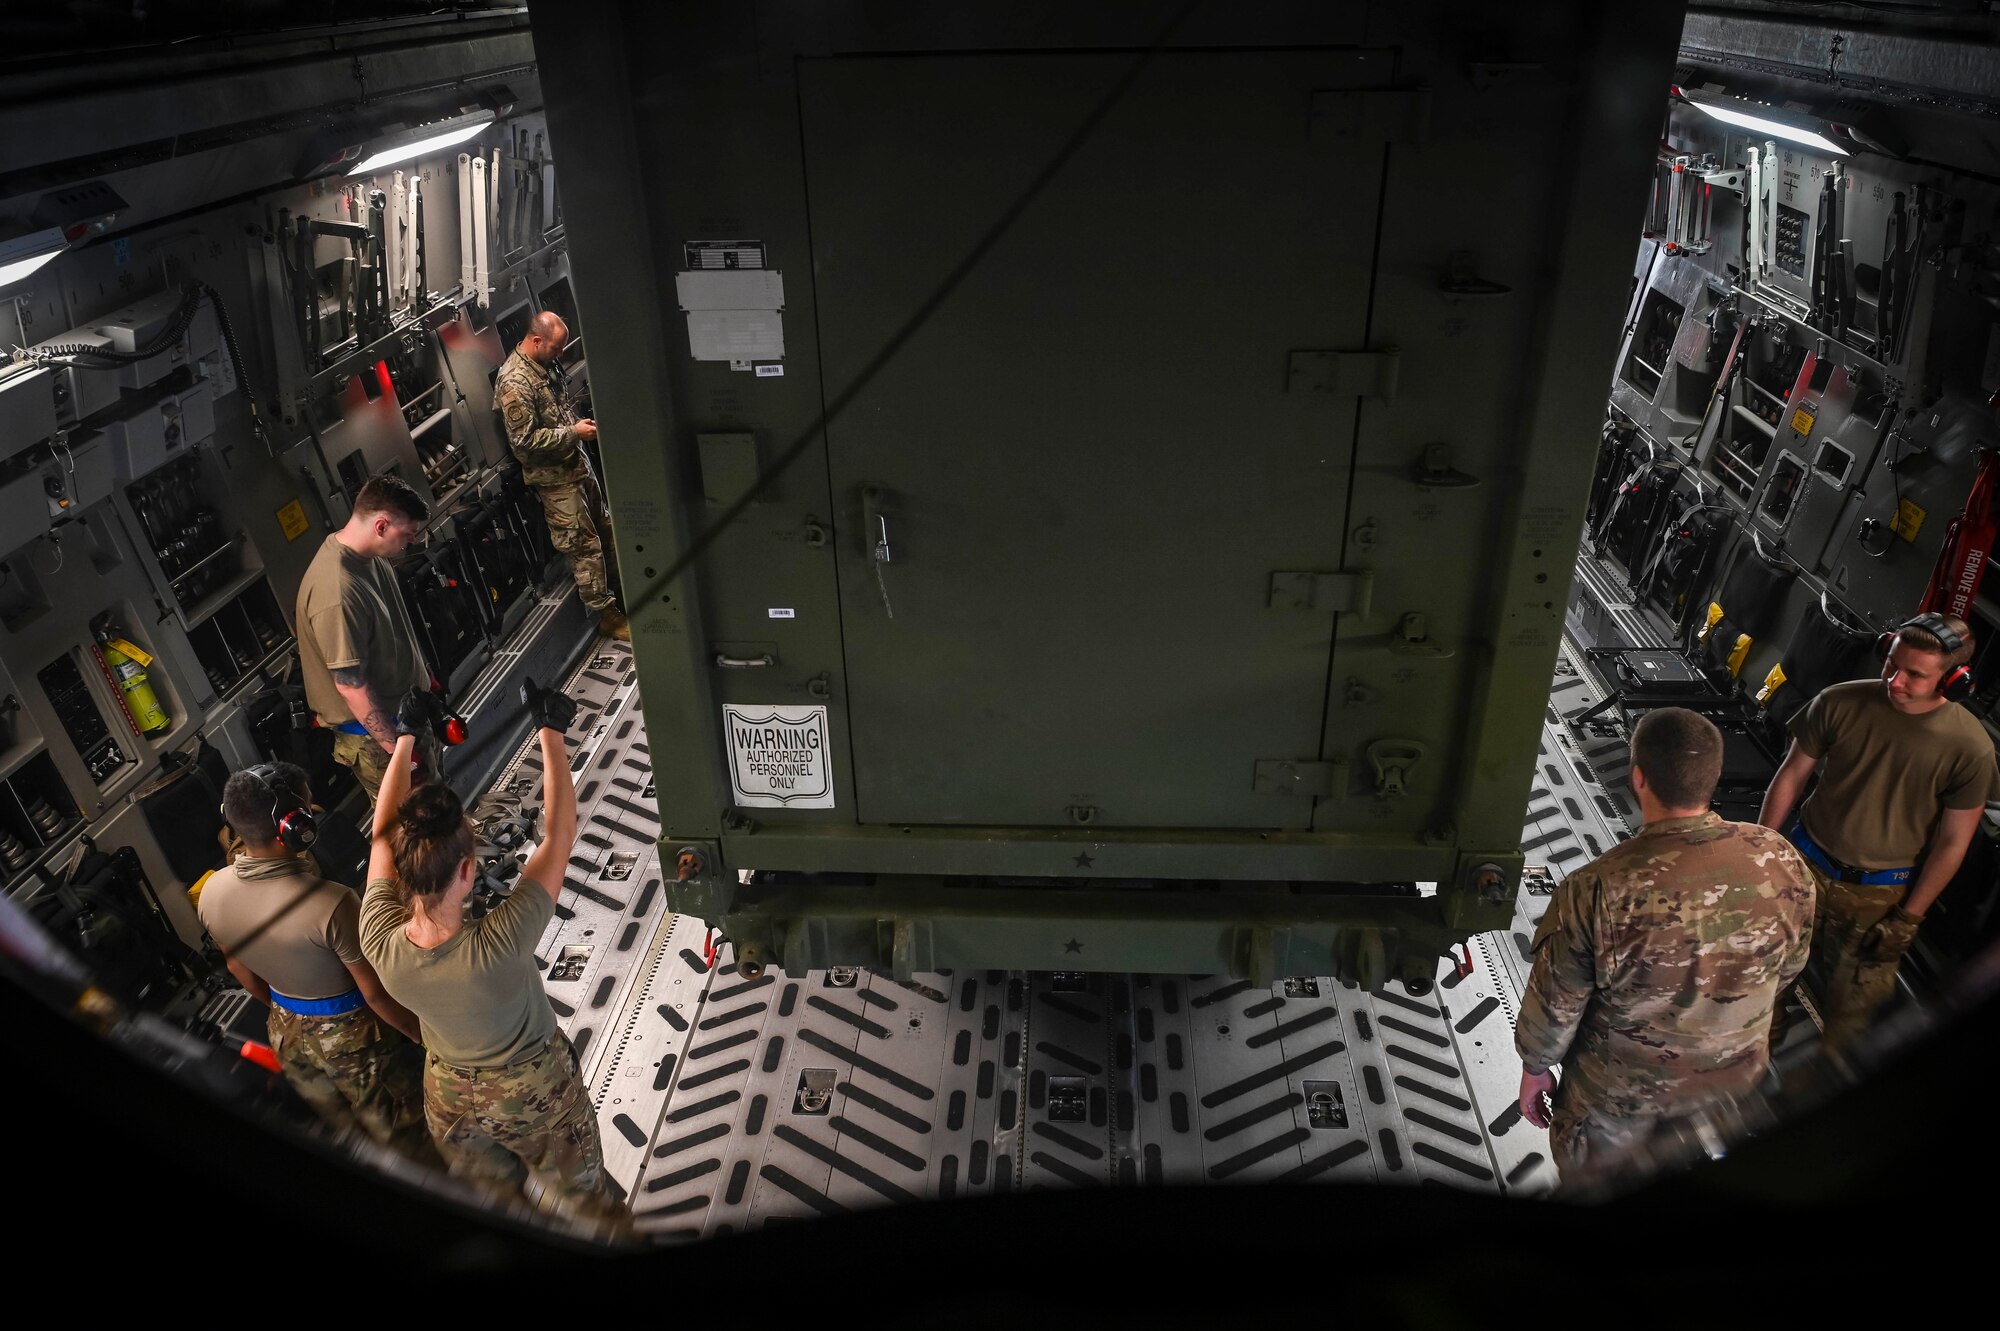 U.S. Air Force Airmen from the 732d Air Mobility Squadron and the 735th Air Mobility Squadron, located at Joint Base Elmendorf-Richardson in Alaska and Joint Base Pearl Harbor-Hickam in Hawaii, load Terminal High-Altitude Area Defense equipment onto a C-17 Globemaster III on Andersen Air Force Base, Guam, March 4, 2022.